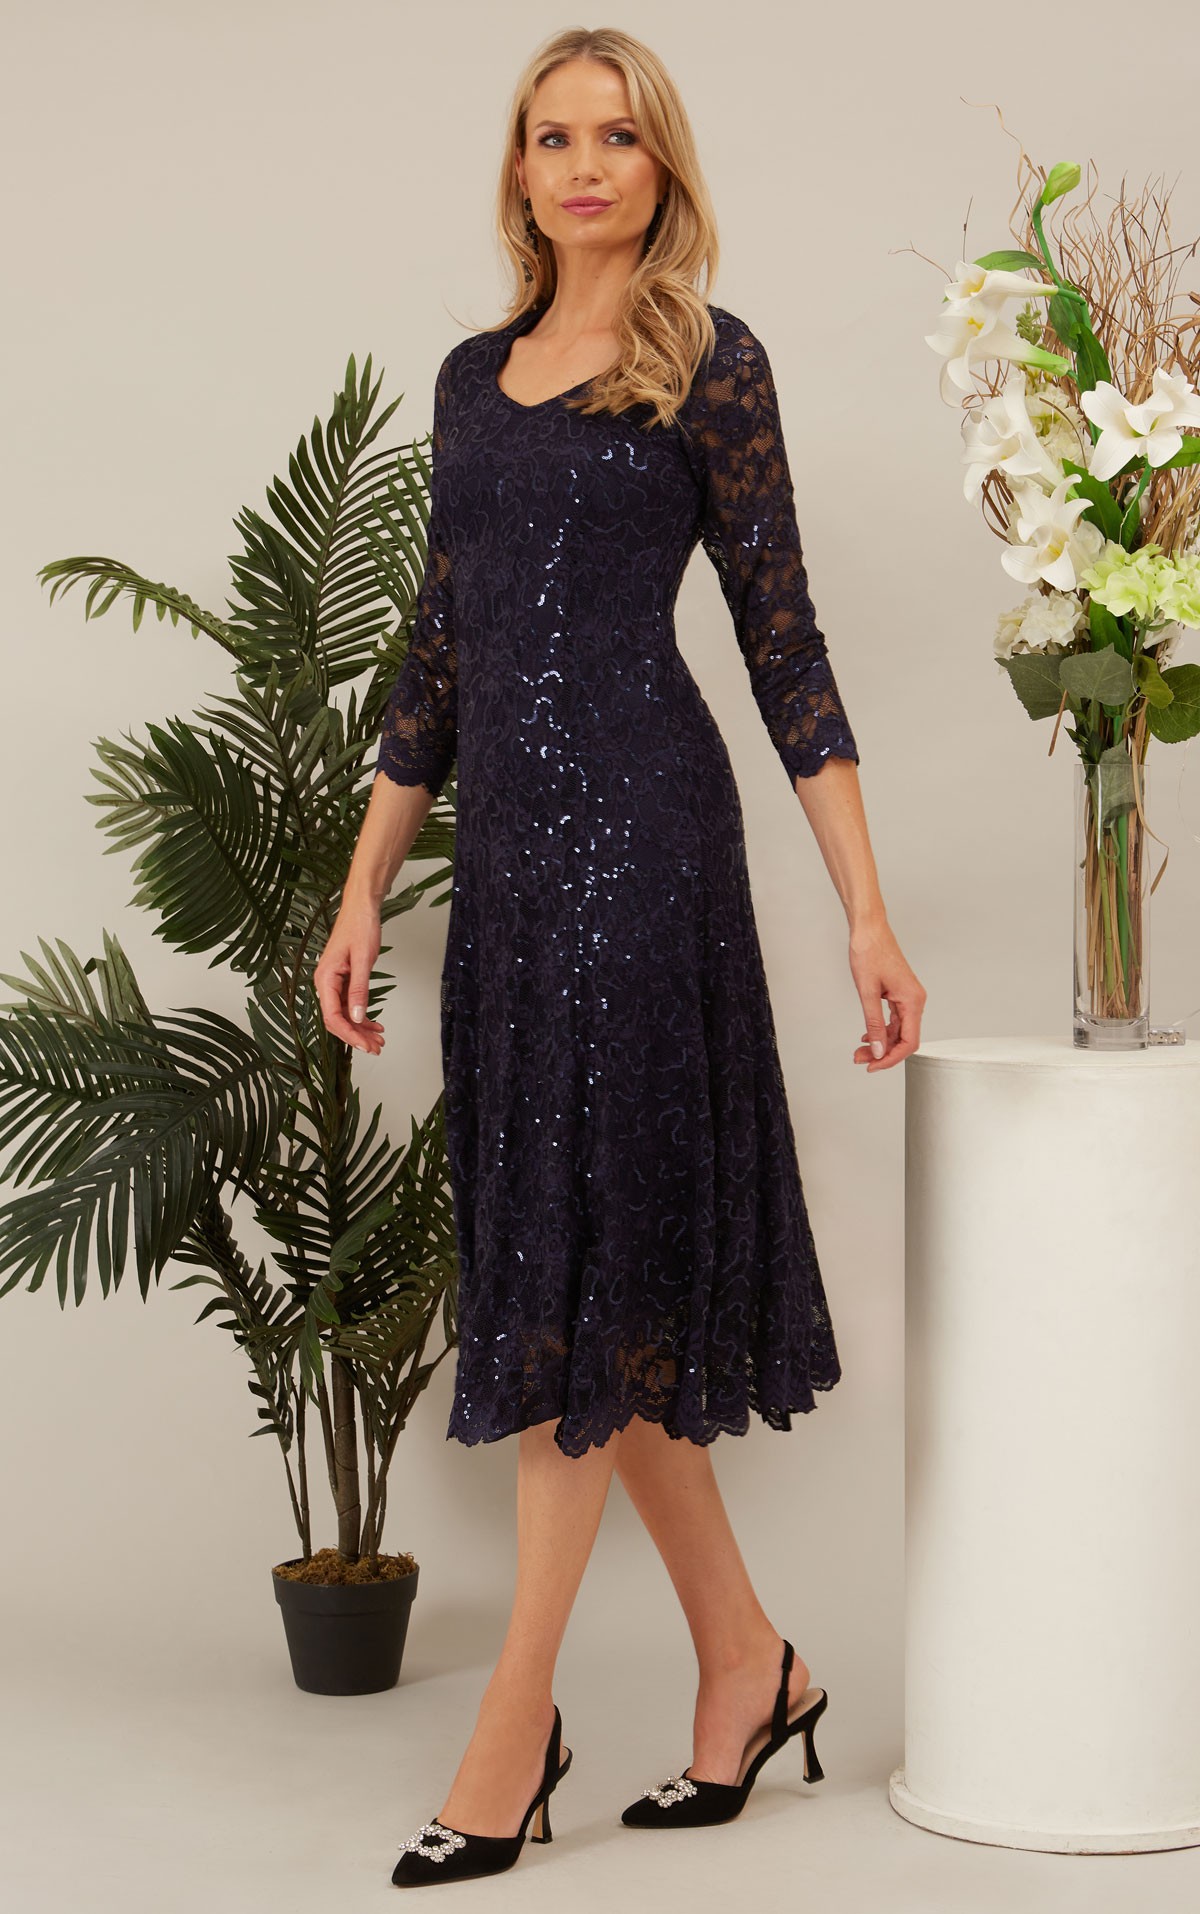 Glitz - 1163 Size 14 & 22 - Glitz 1163  Beautiful Navy beaded stretch lace  dress with sleeves- Perfect occasion, Informal wedding & Lady Guest Dresses at Occasions at Blessings, 1 Loyal Parade, Mill Rise, Westdene, Brighton. E.Sussex BN1 5GG  - Free Easy Parkings T: 01273 505766 E: info@blessingsbridal.co.uk